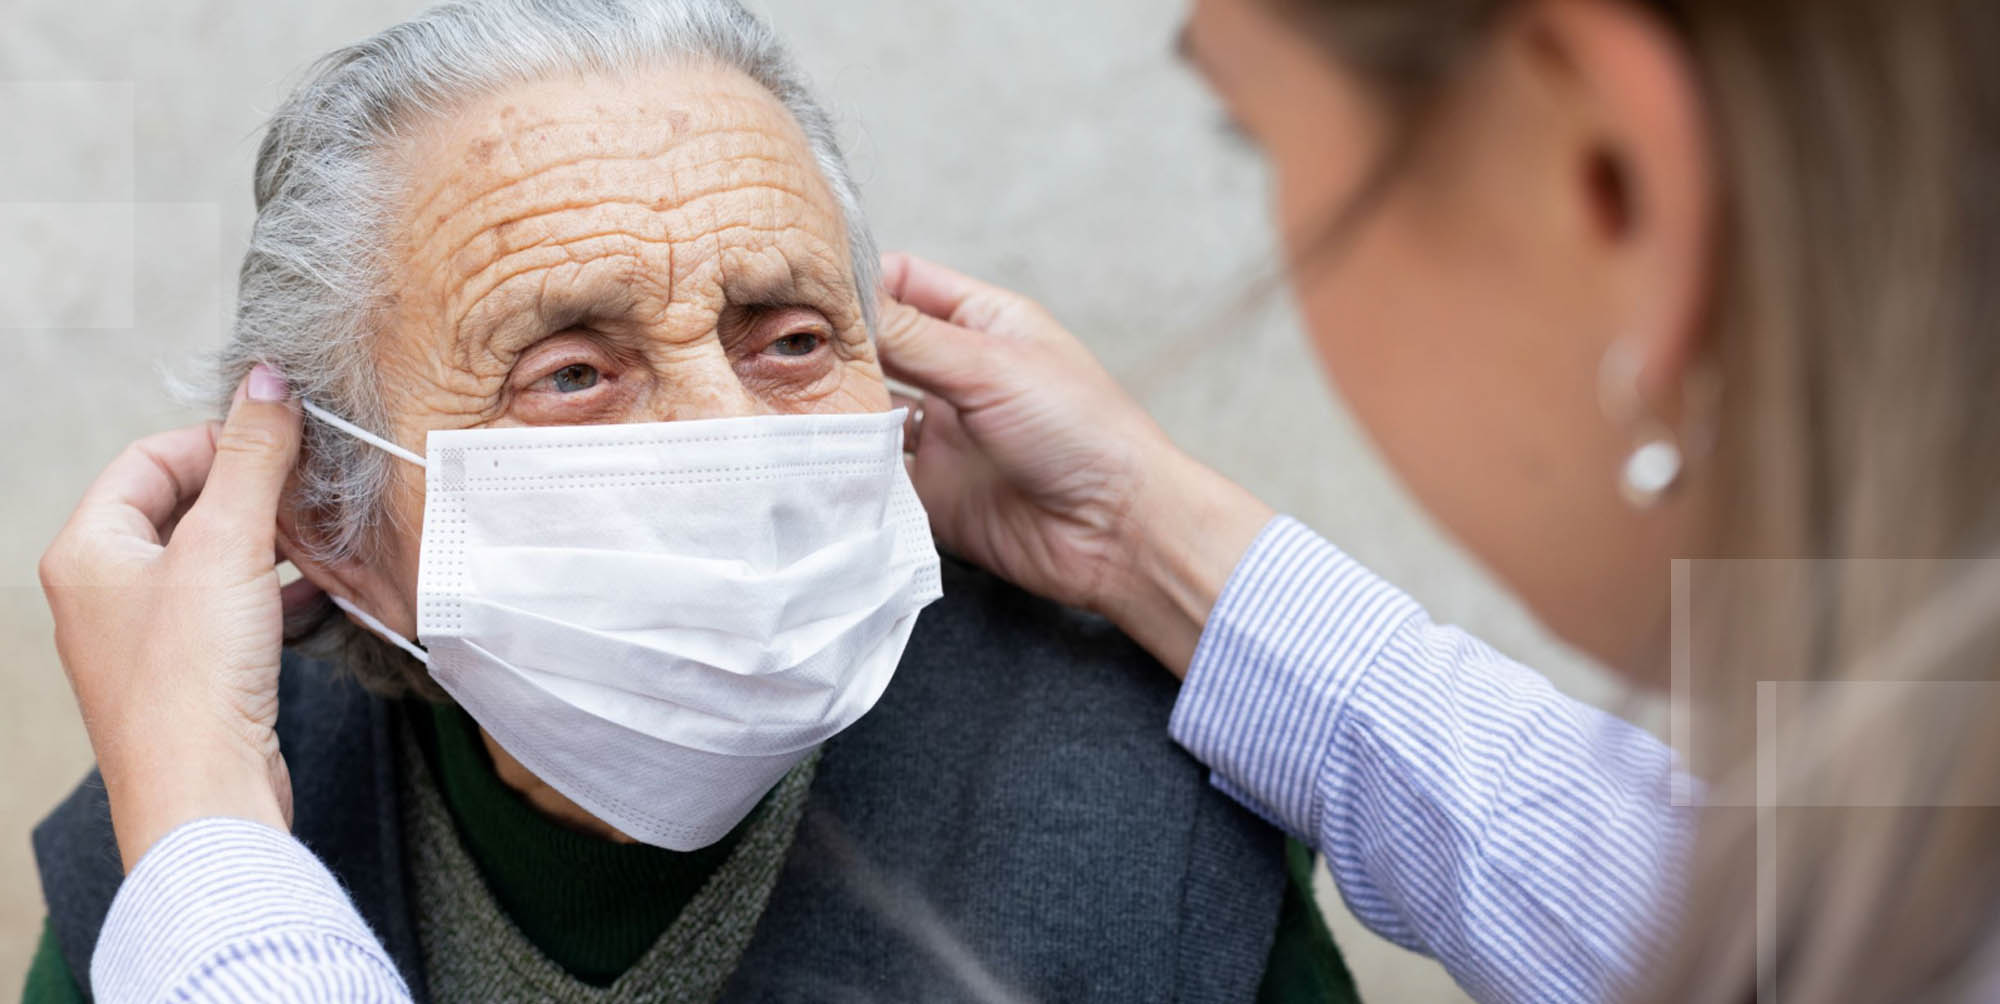 home care assistant practicing safety putting mask on elderly woman